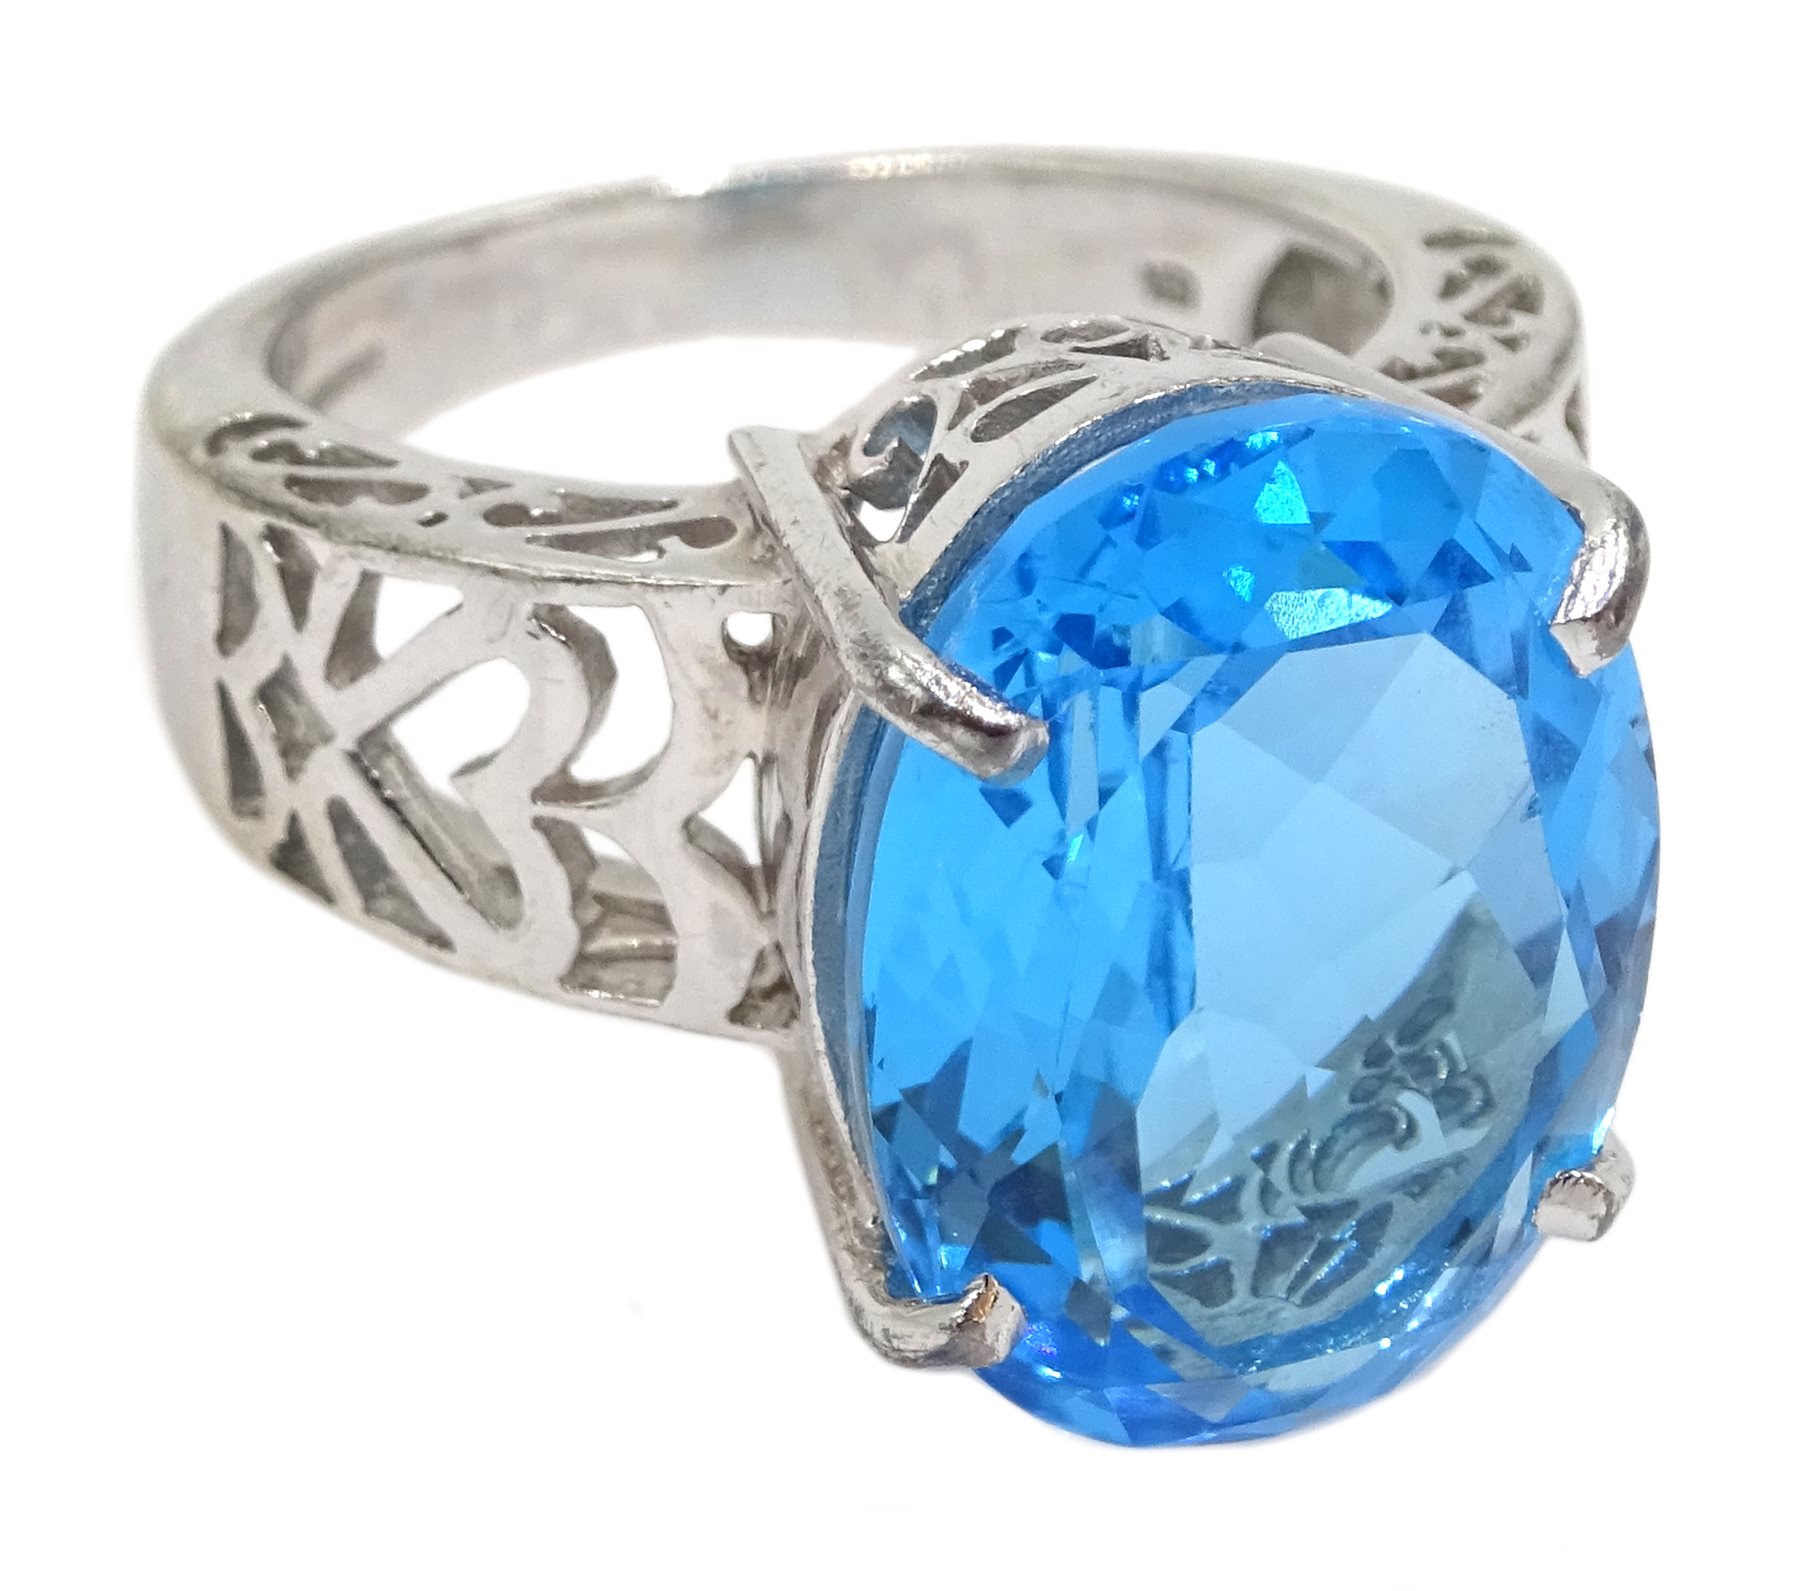 9ct white gold oval Swiss blue topaz ring, with openwork shank, stamped 375 [image code: 4mc] - Image 2 of 4